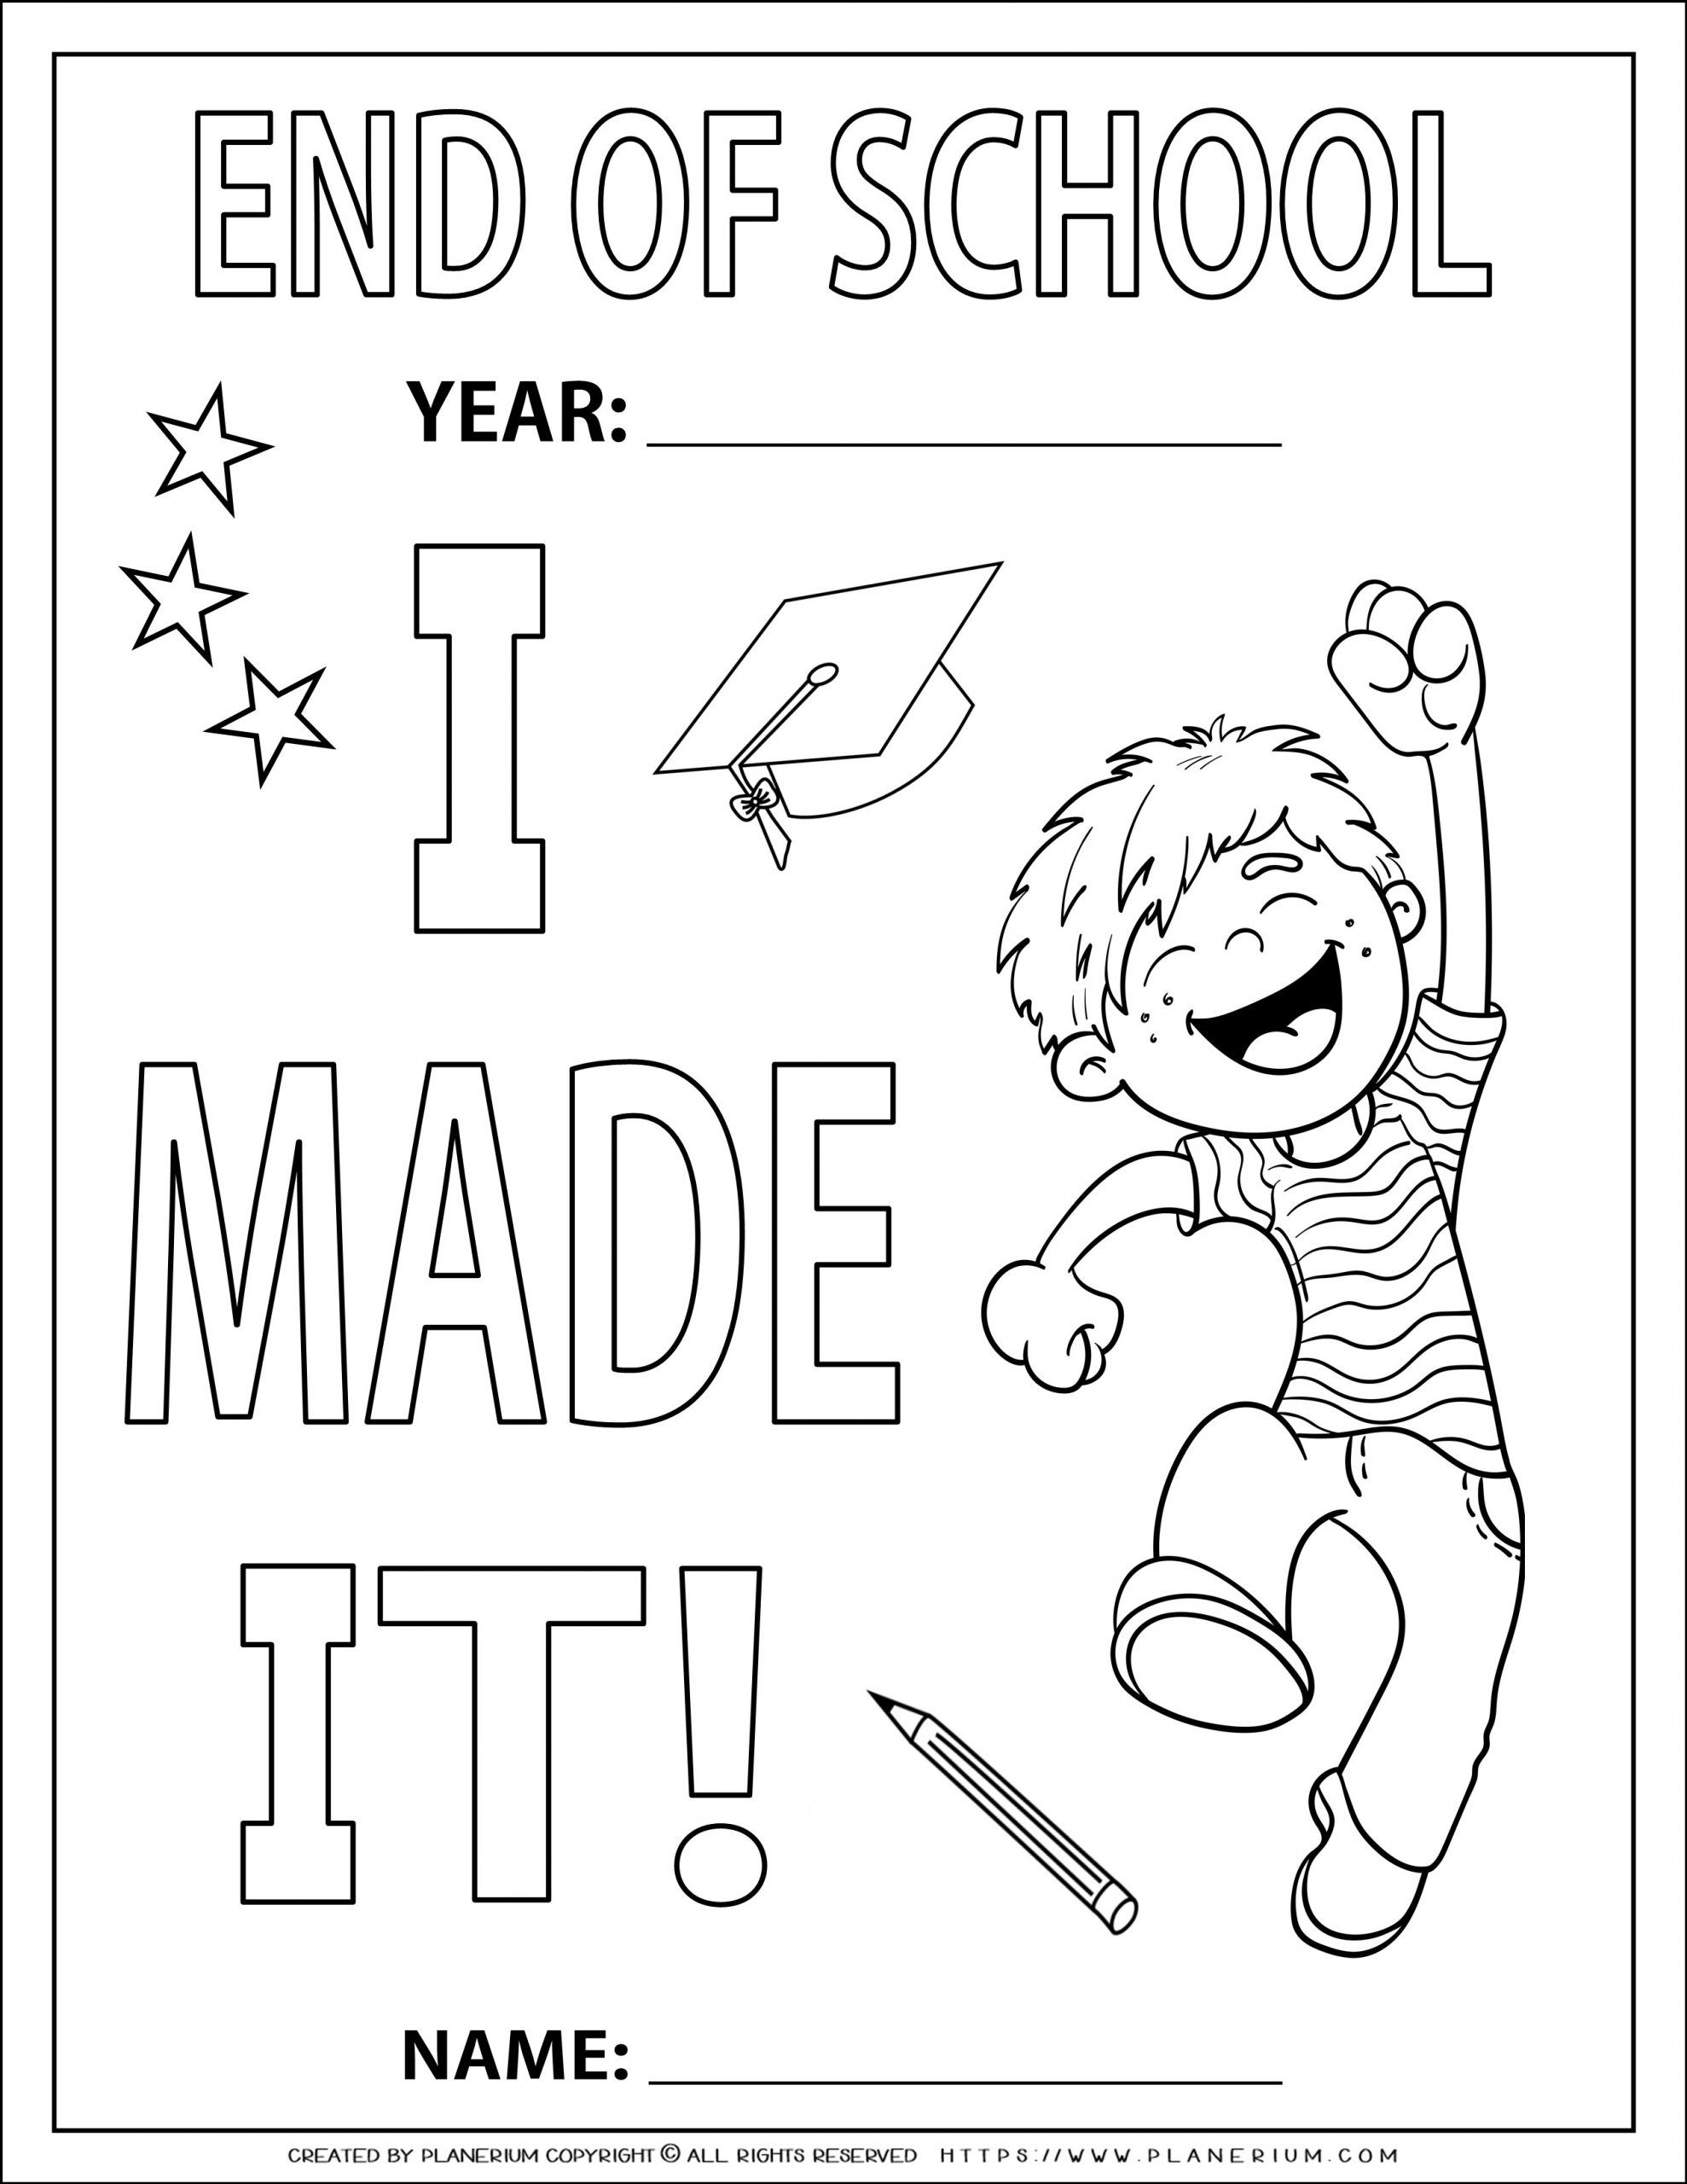 free-end-of-school-coloring-pages